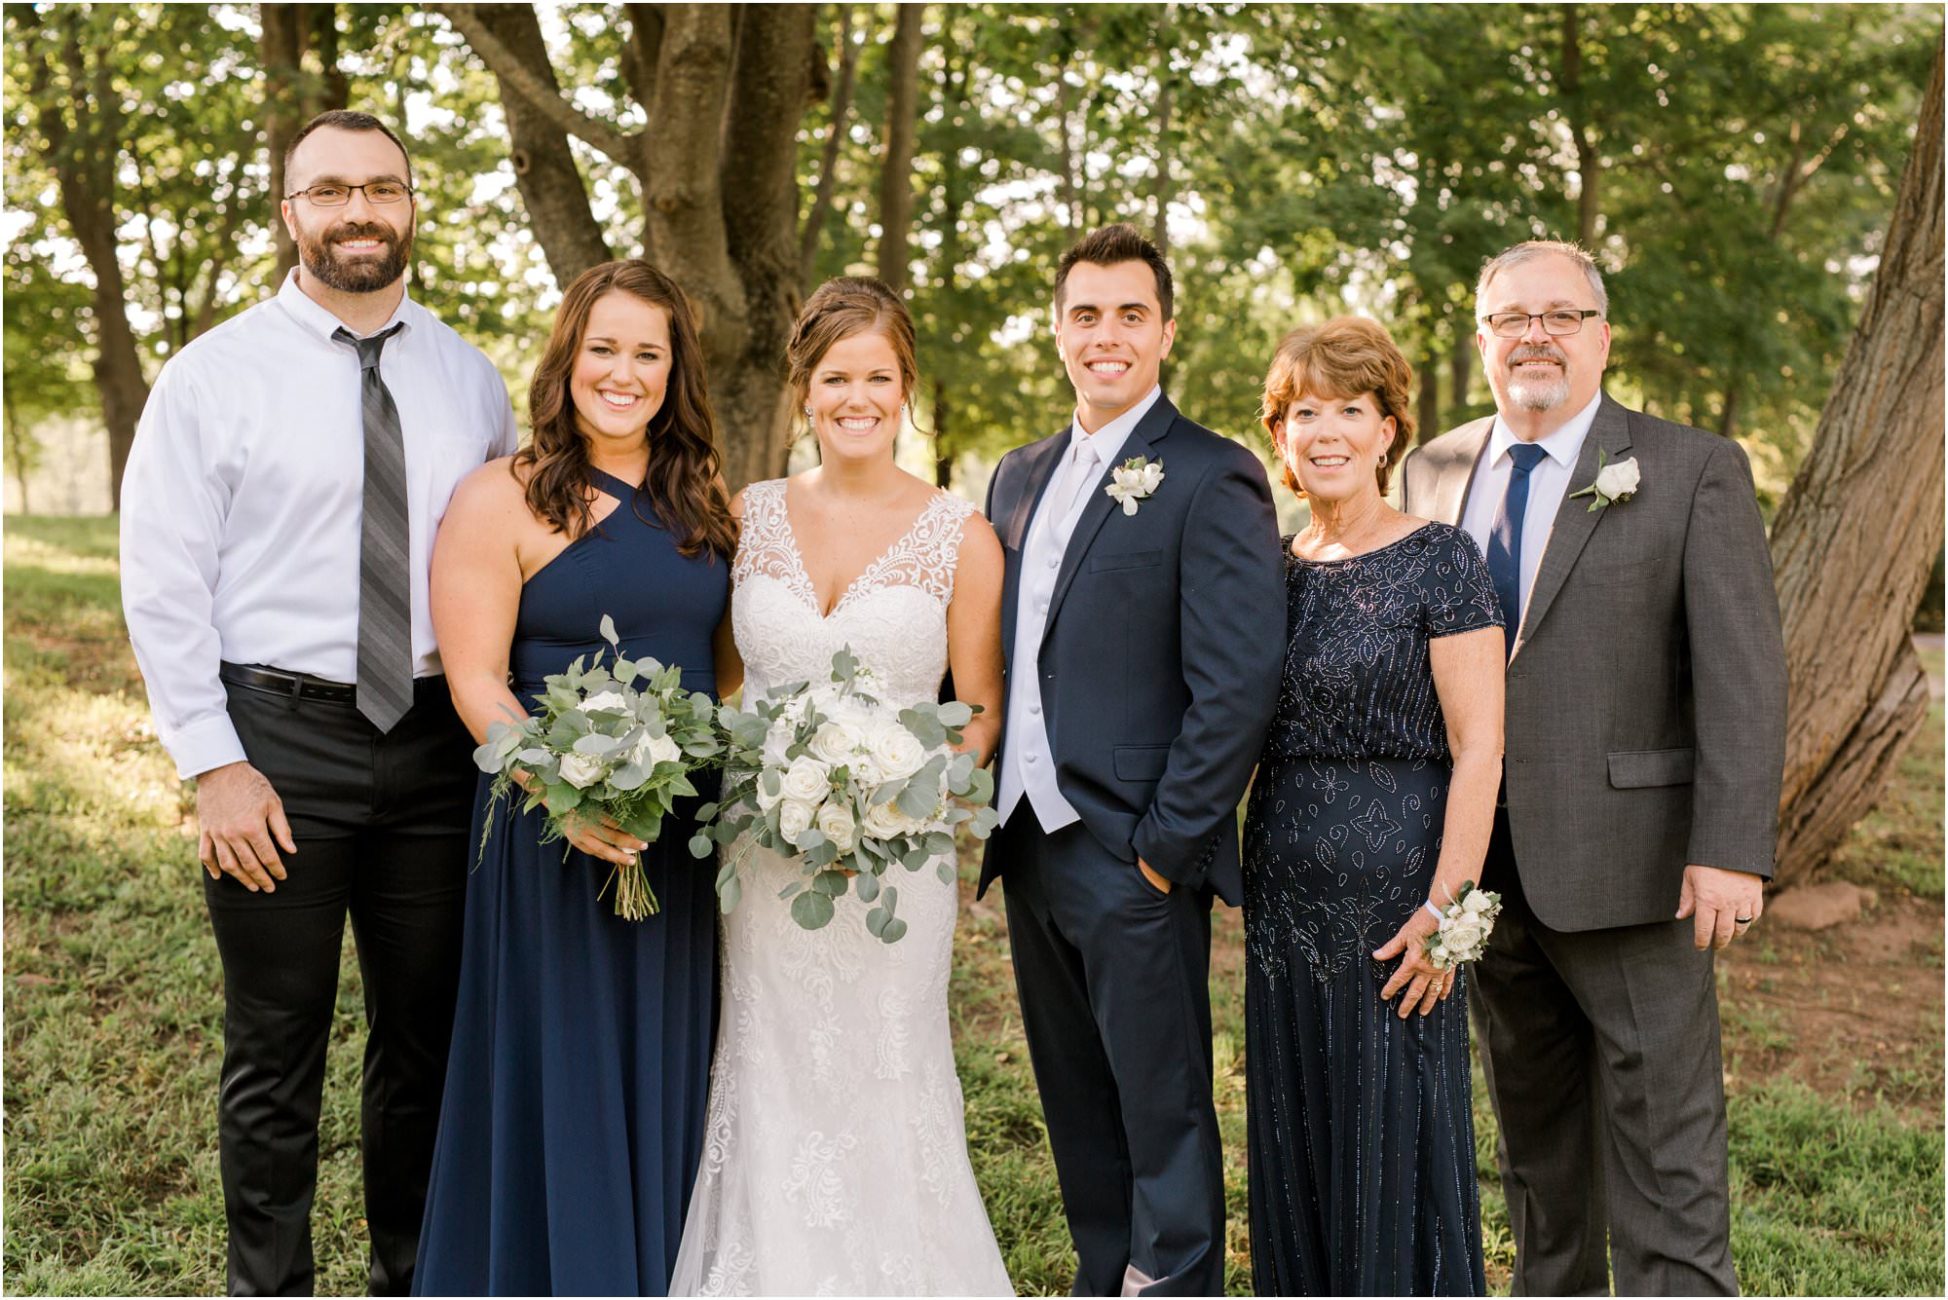 tips for photographing families on a wedding day